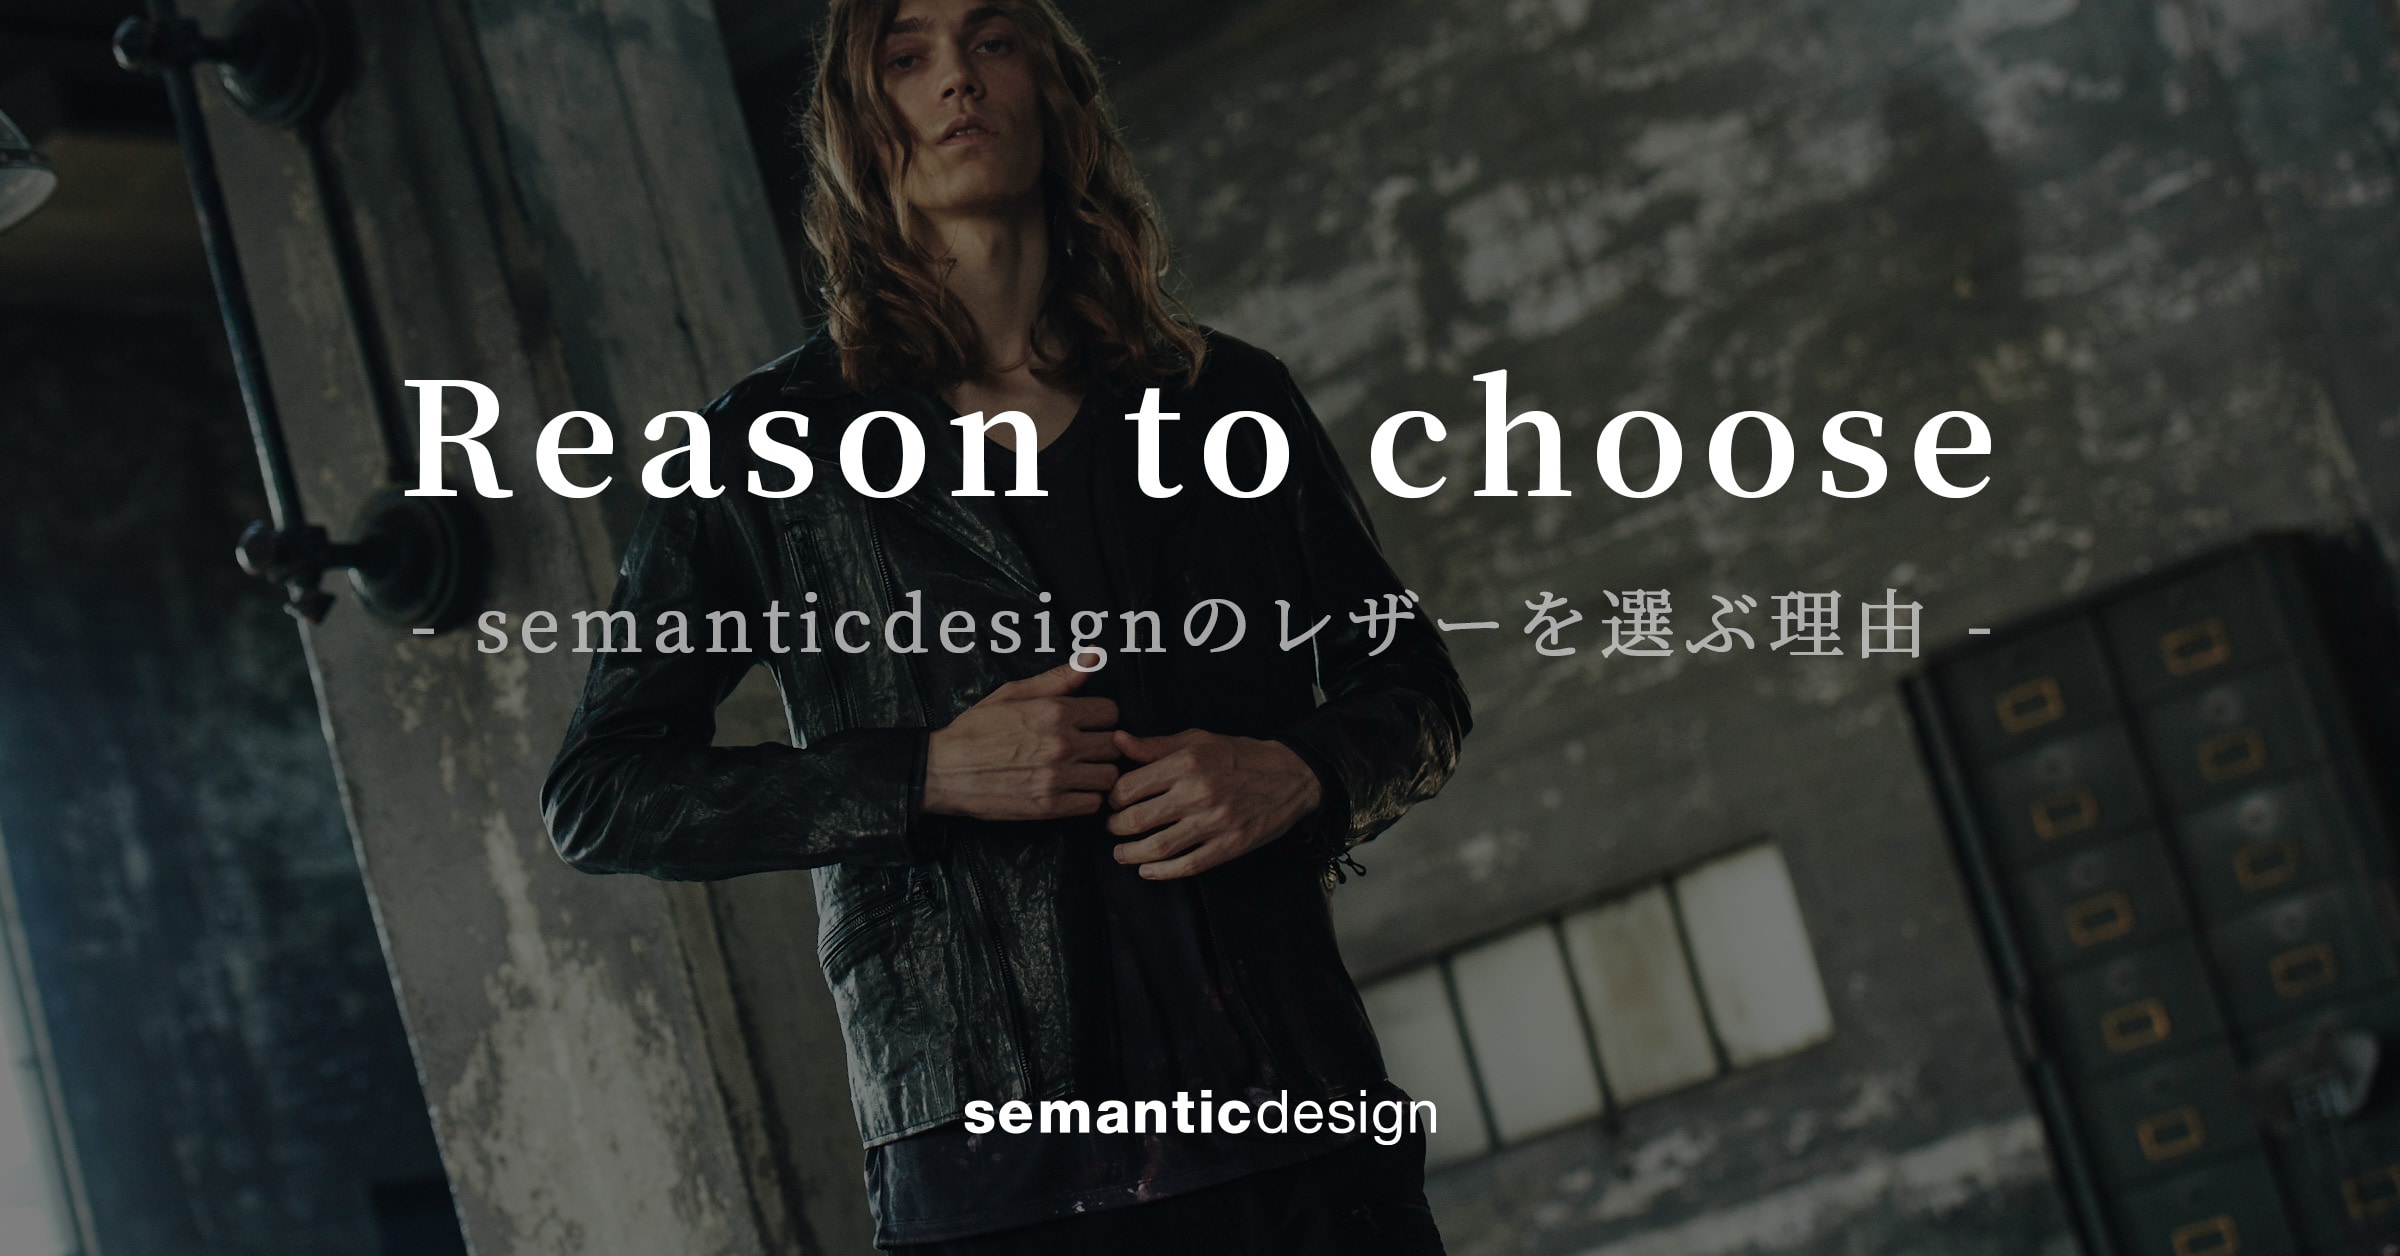 semanticdesign 2020 leather collection